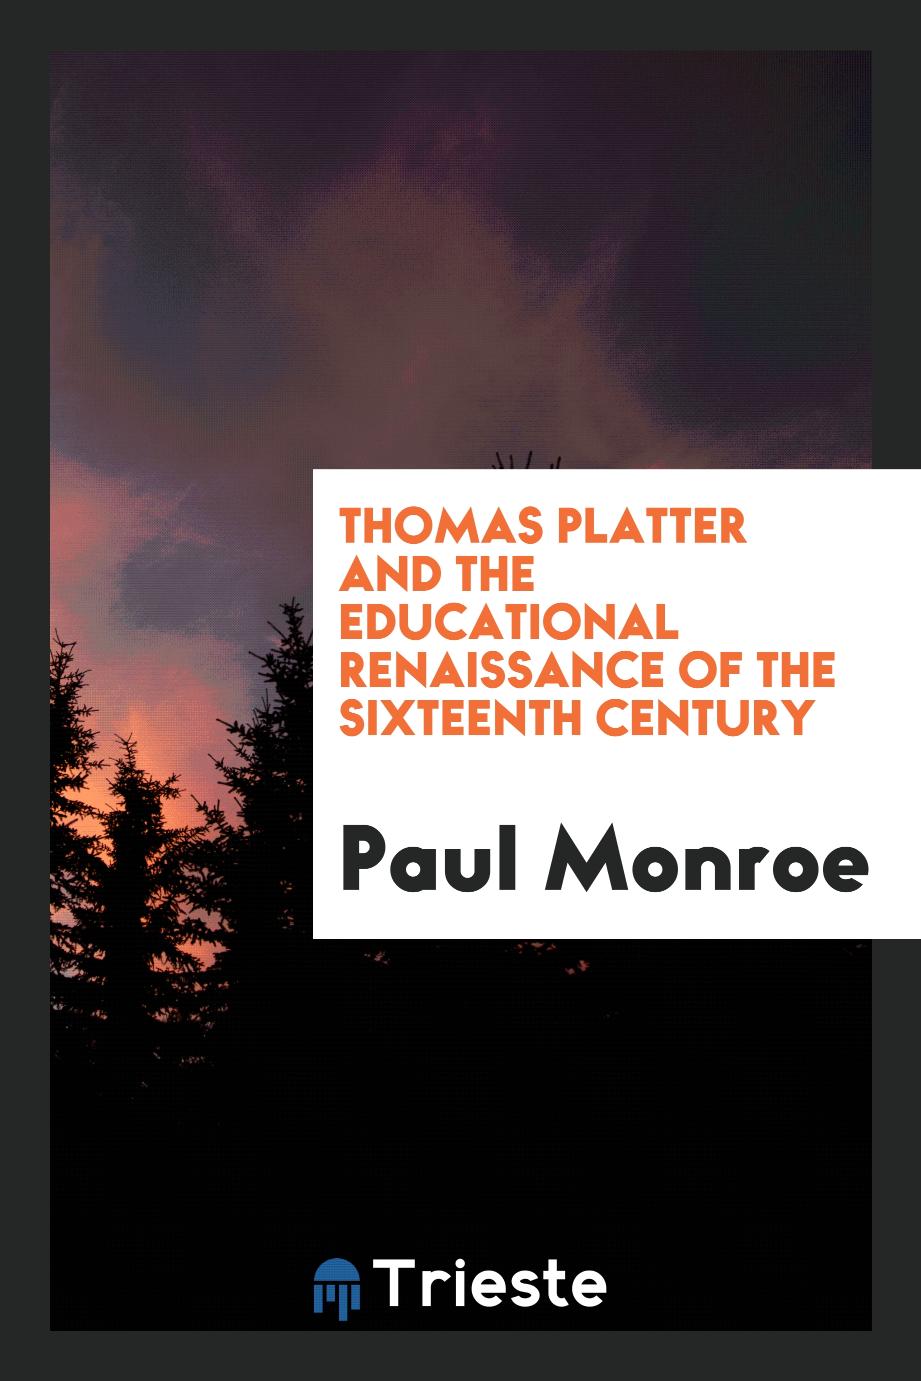 Thomas Platter and the educational renaissance of the sixteenth century